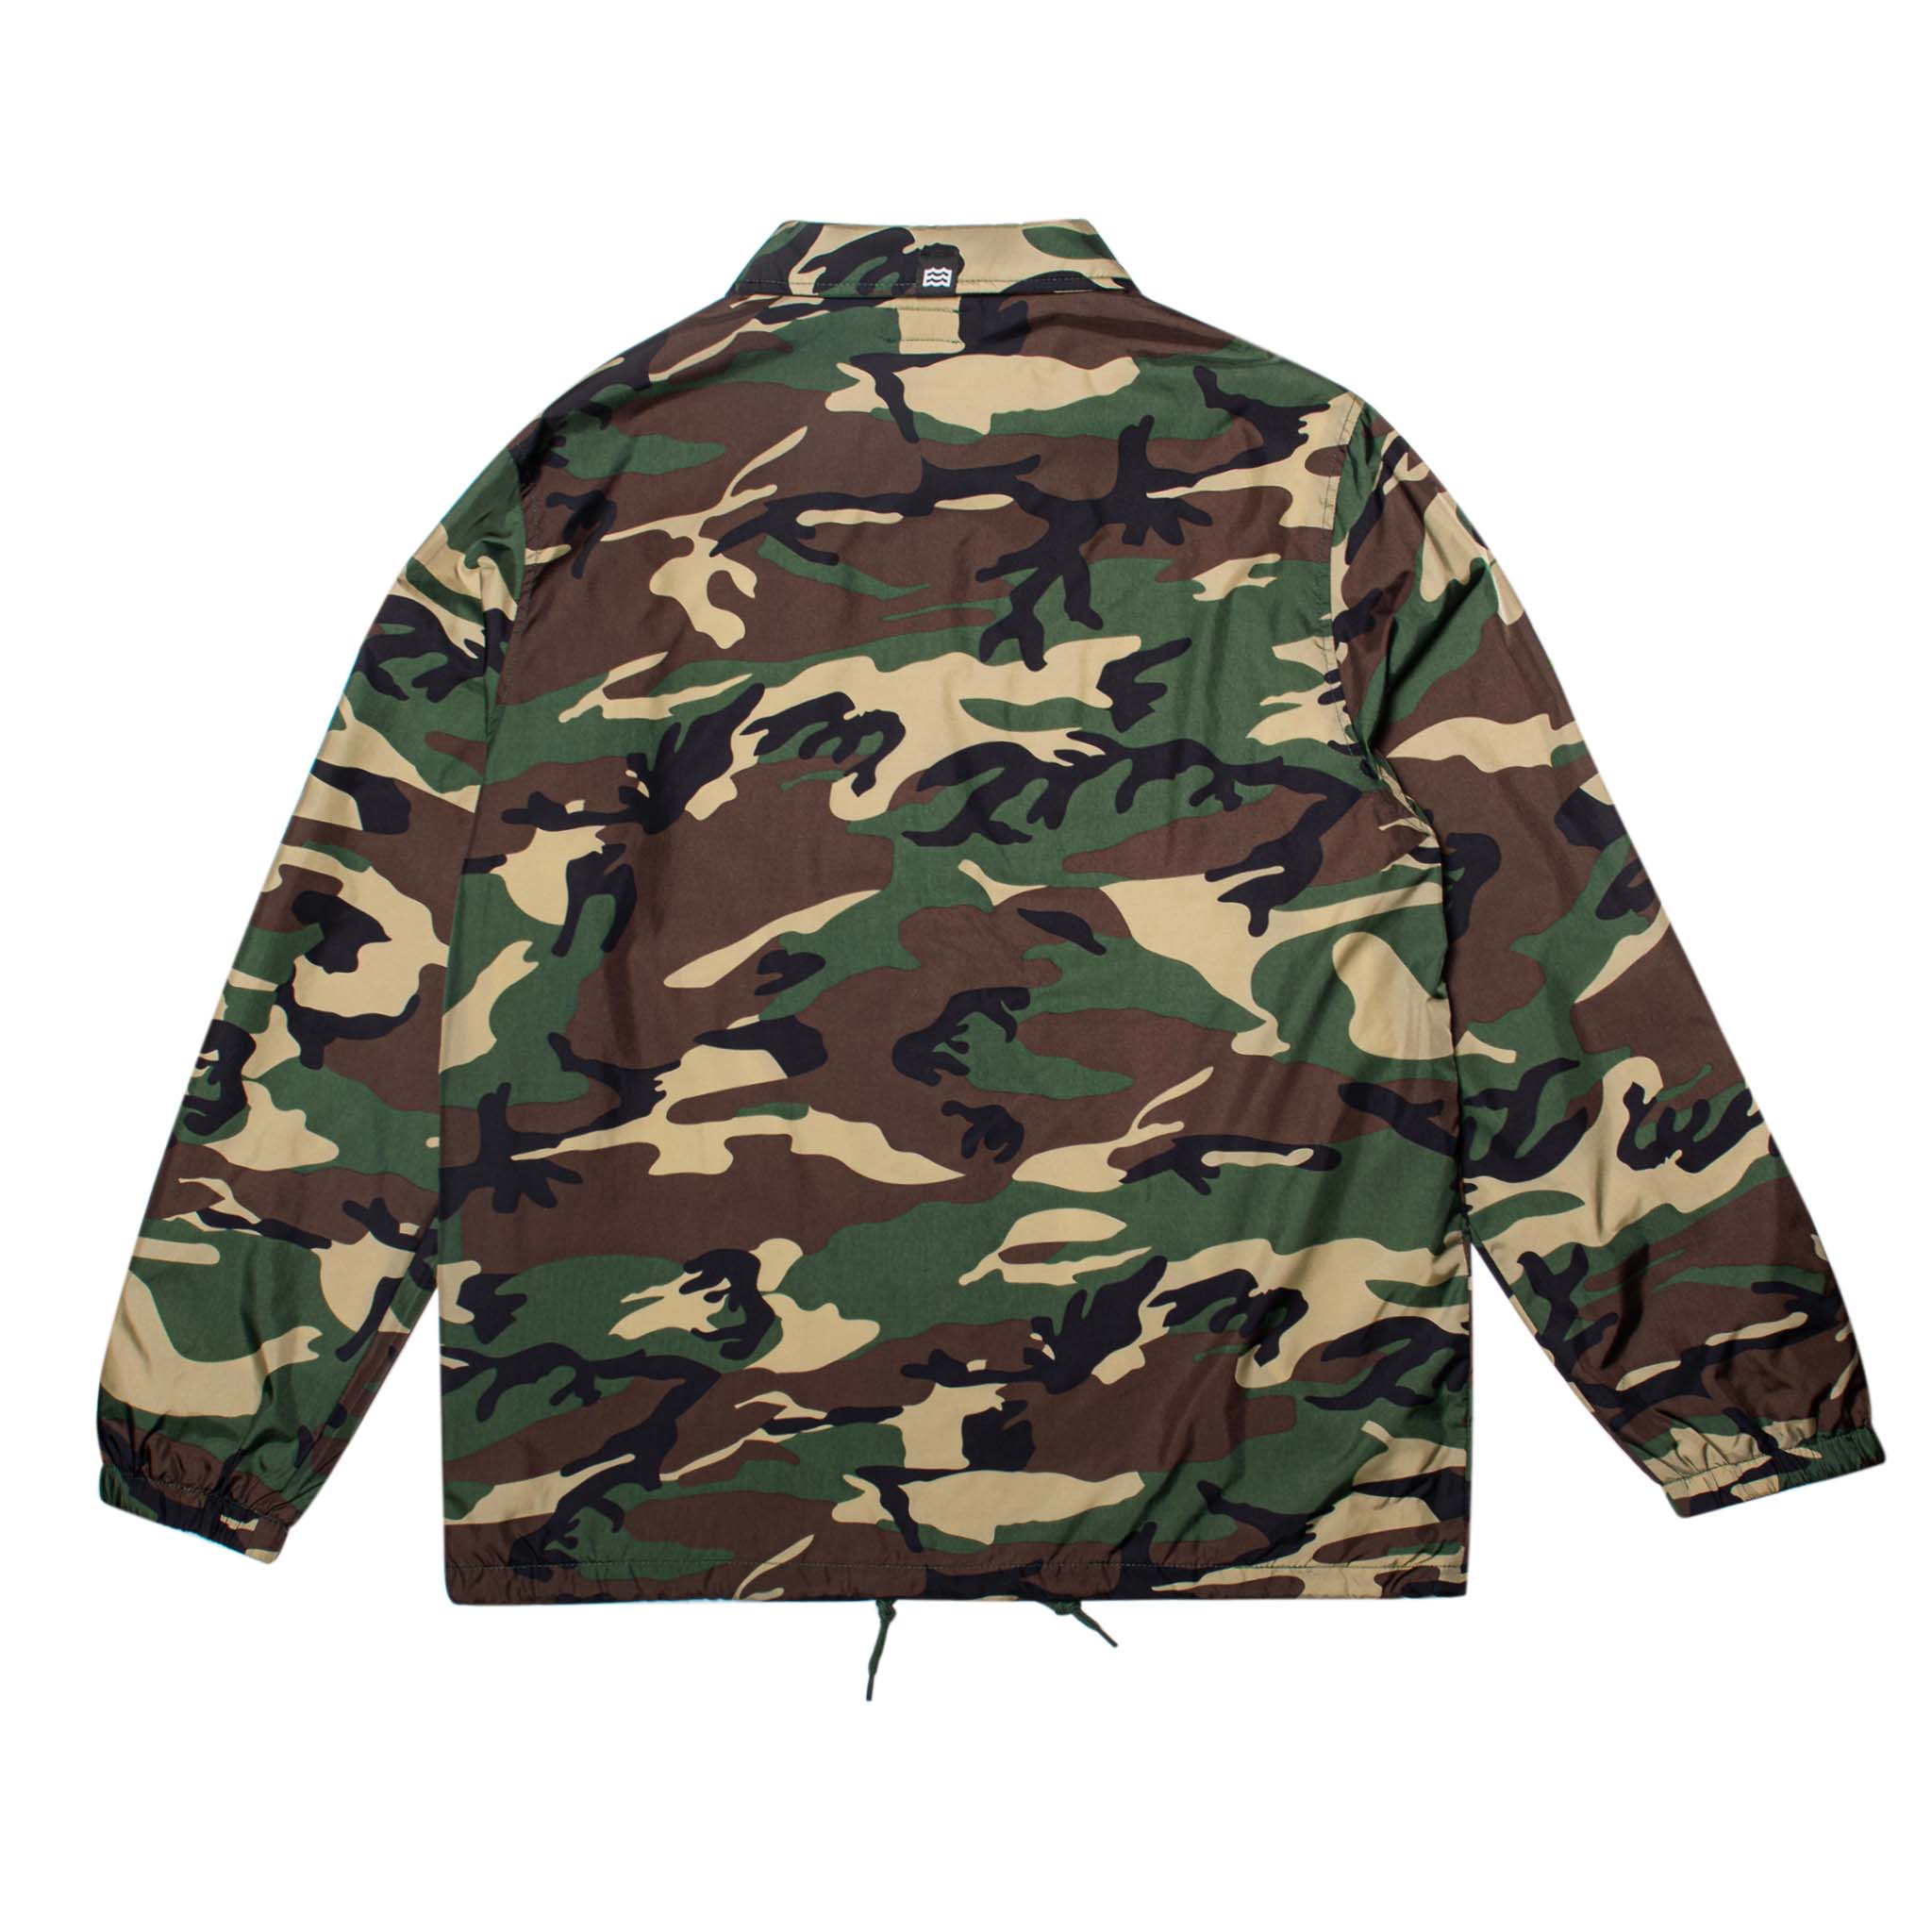 Tiger Camo Coach Jacket by Lateral Vision